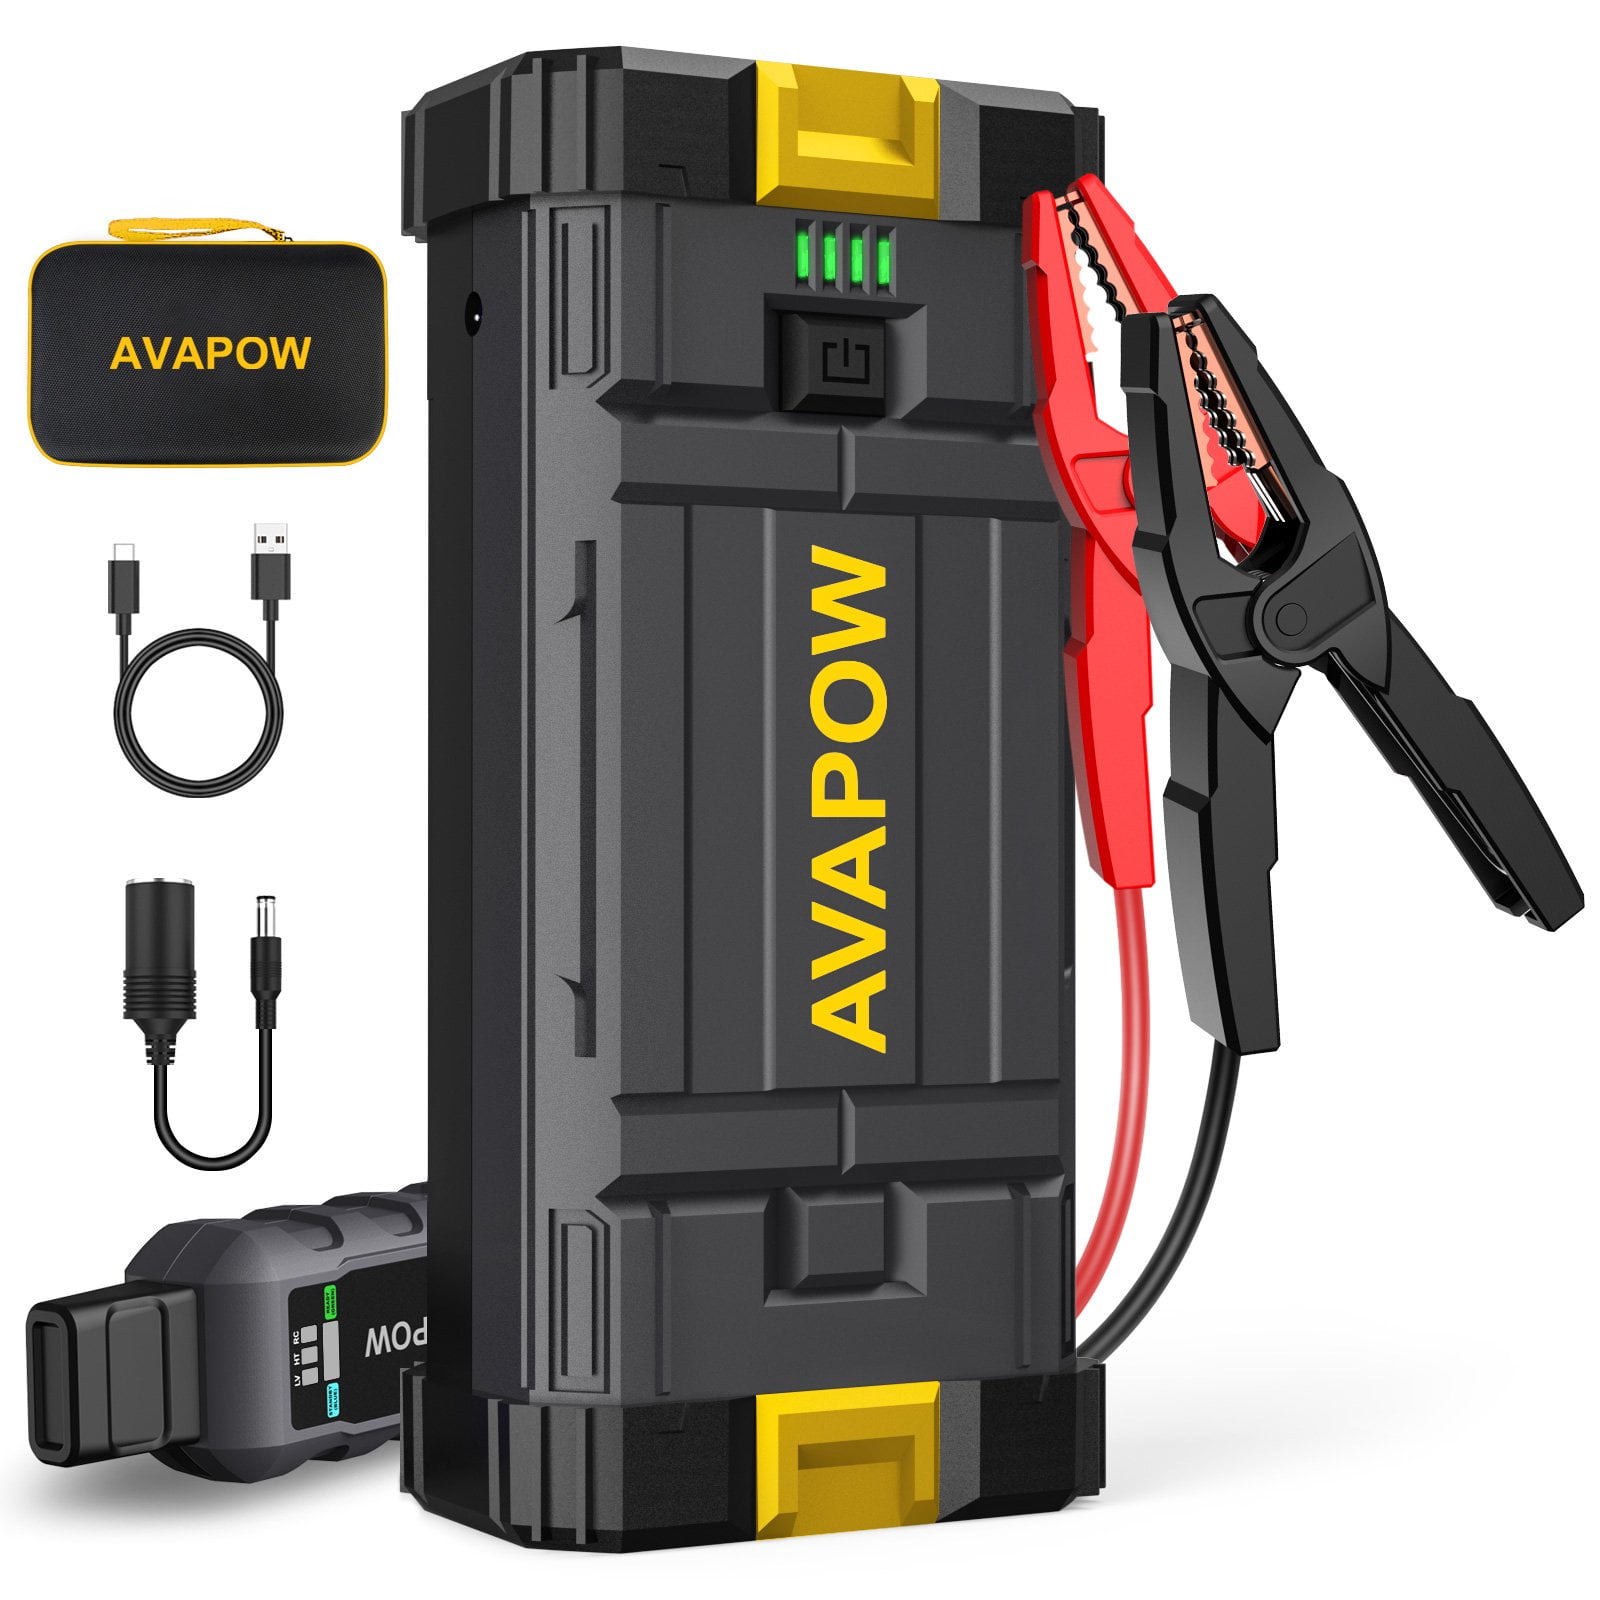 AVAPOW Car Jump Starter, 4000A Peak 27800mAh Battery Jump Starter (for All  Gas or Up to 10L Diesel), Battery Booster Power Pack, 12V Auto Jump Box  with LED Light, USB Quick Charge